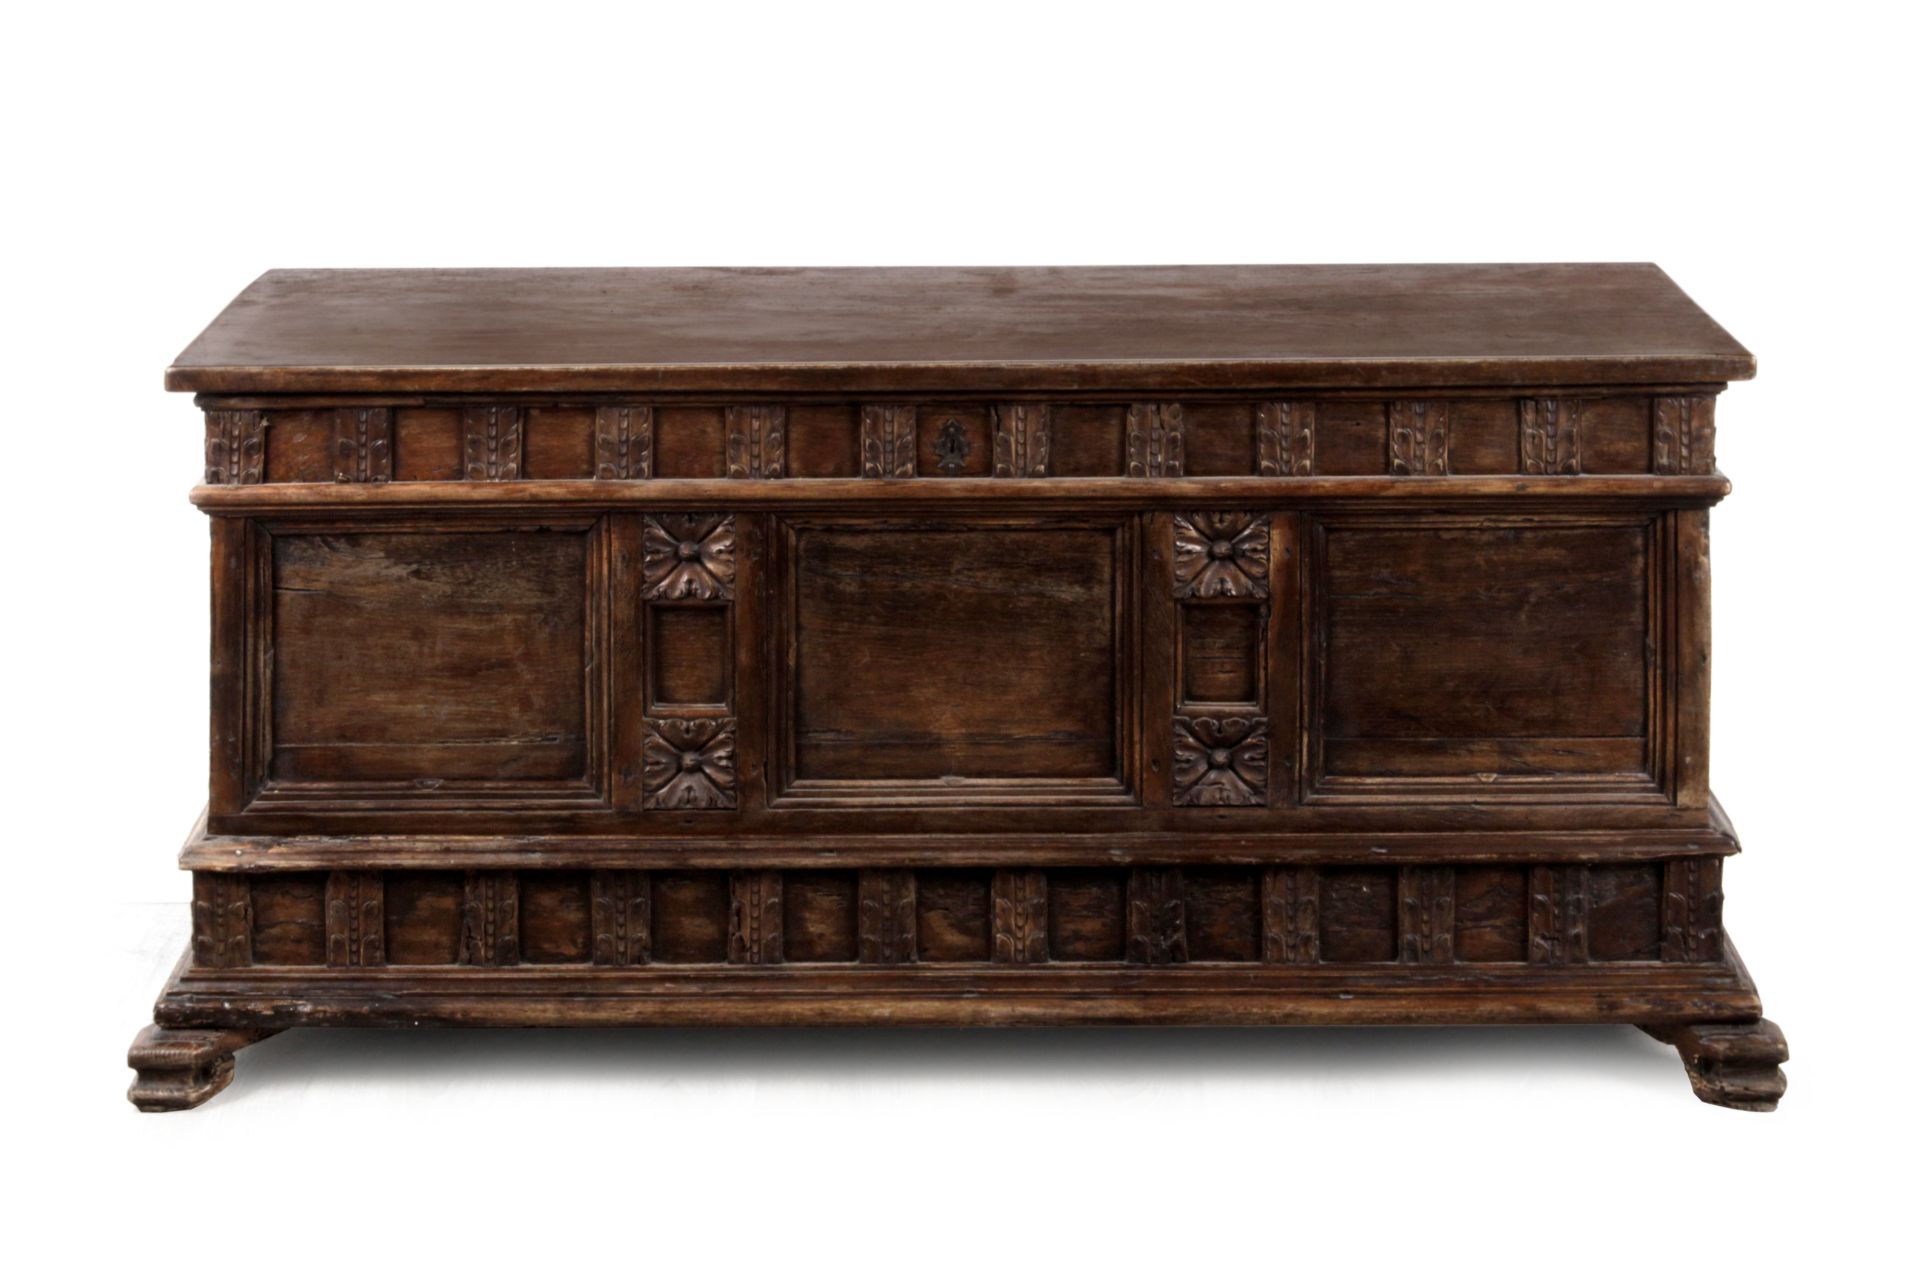 An 18th century walnut bride chest - Image 2 of 4